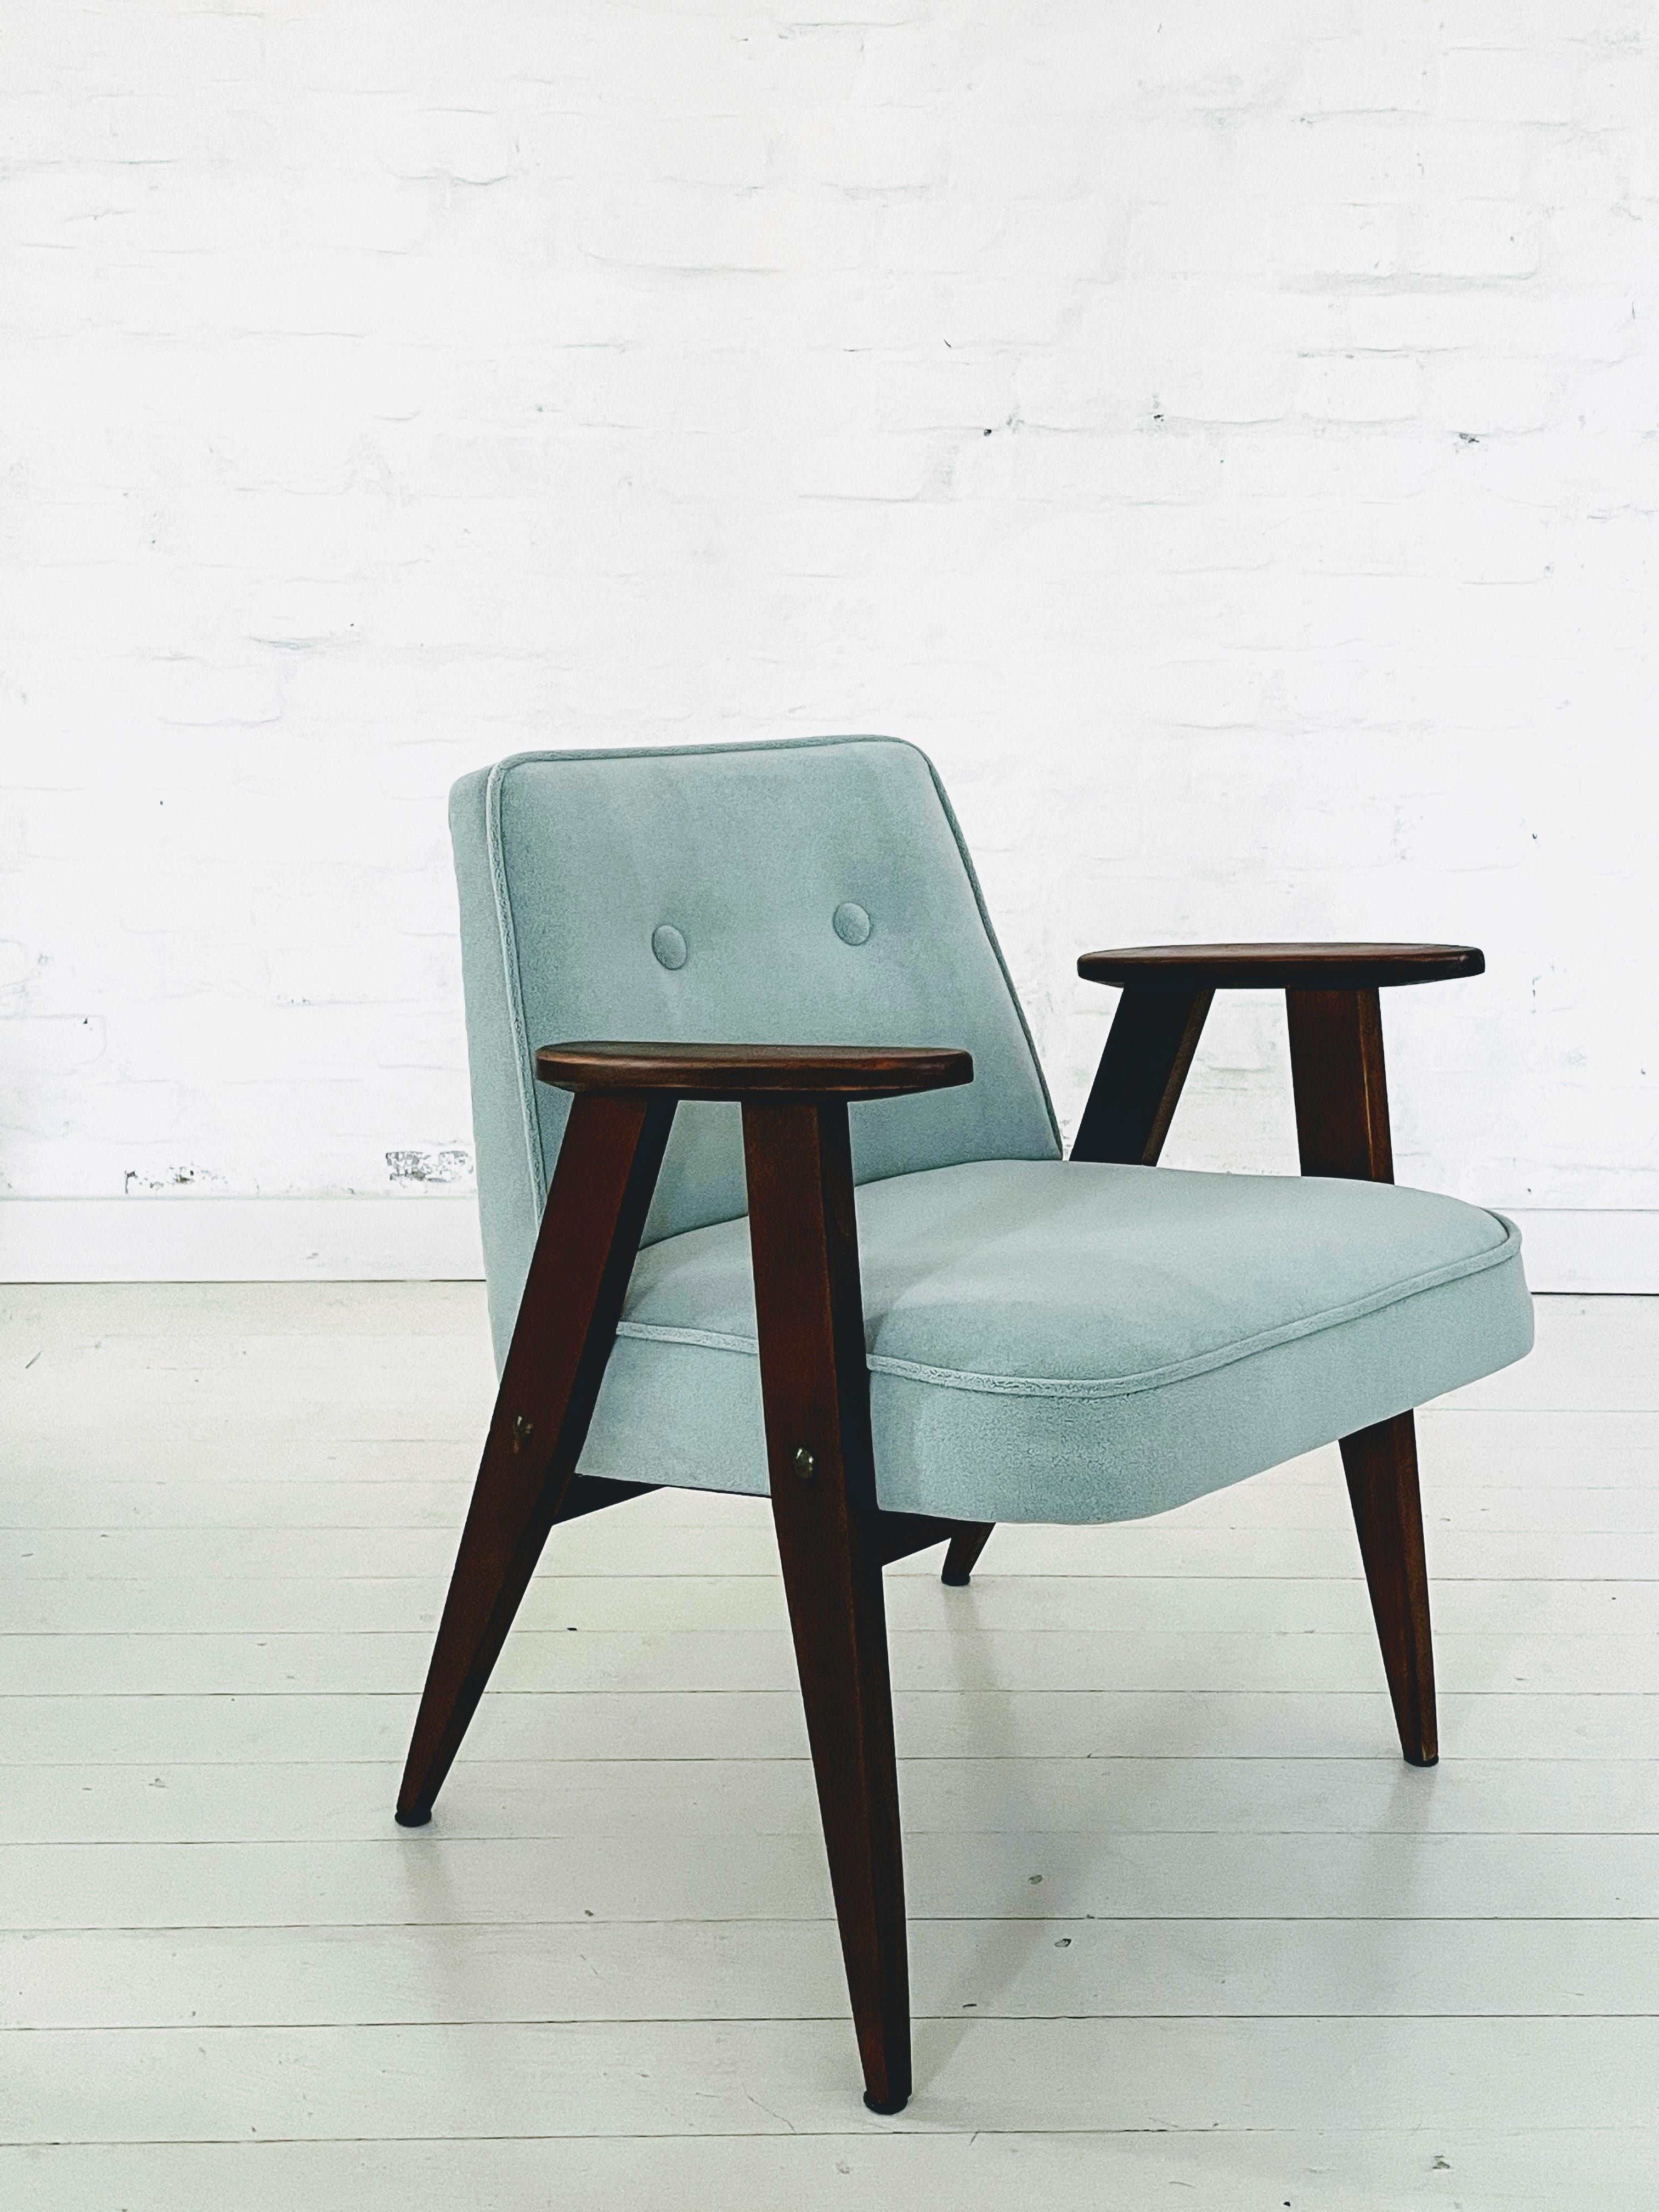 This polish armchair, model 366, dates from the 1960s and was designed by Józef Chierowski. The chair is upholstered in a sea green fabric and has four stained beech compass feet. In very good condition because it has been refreshed through new